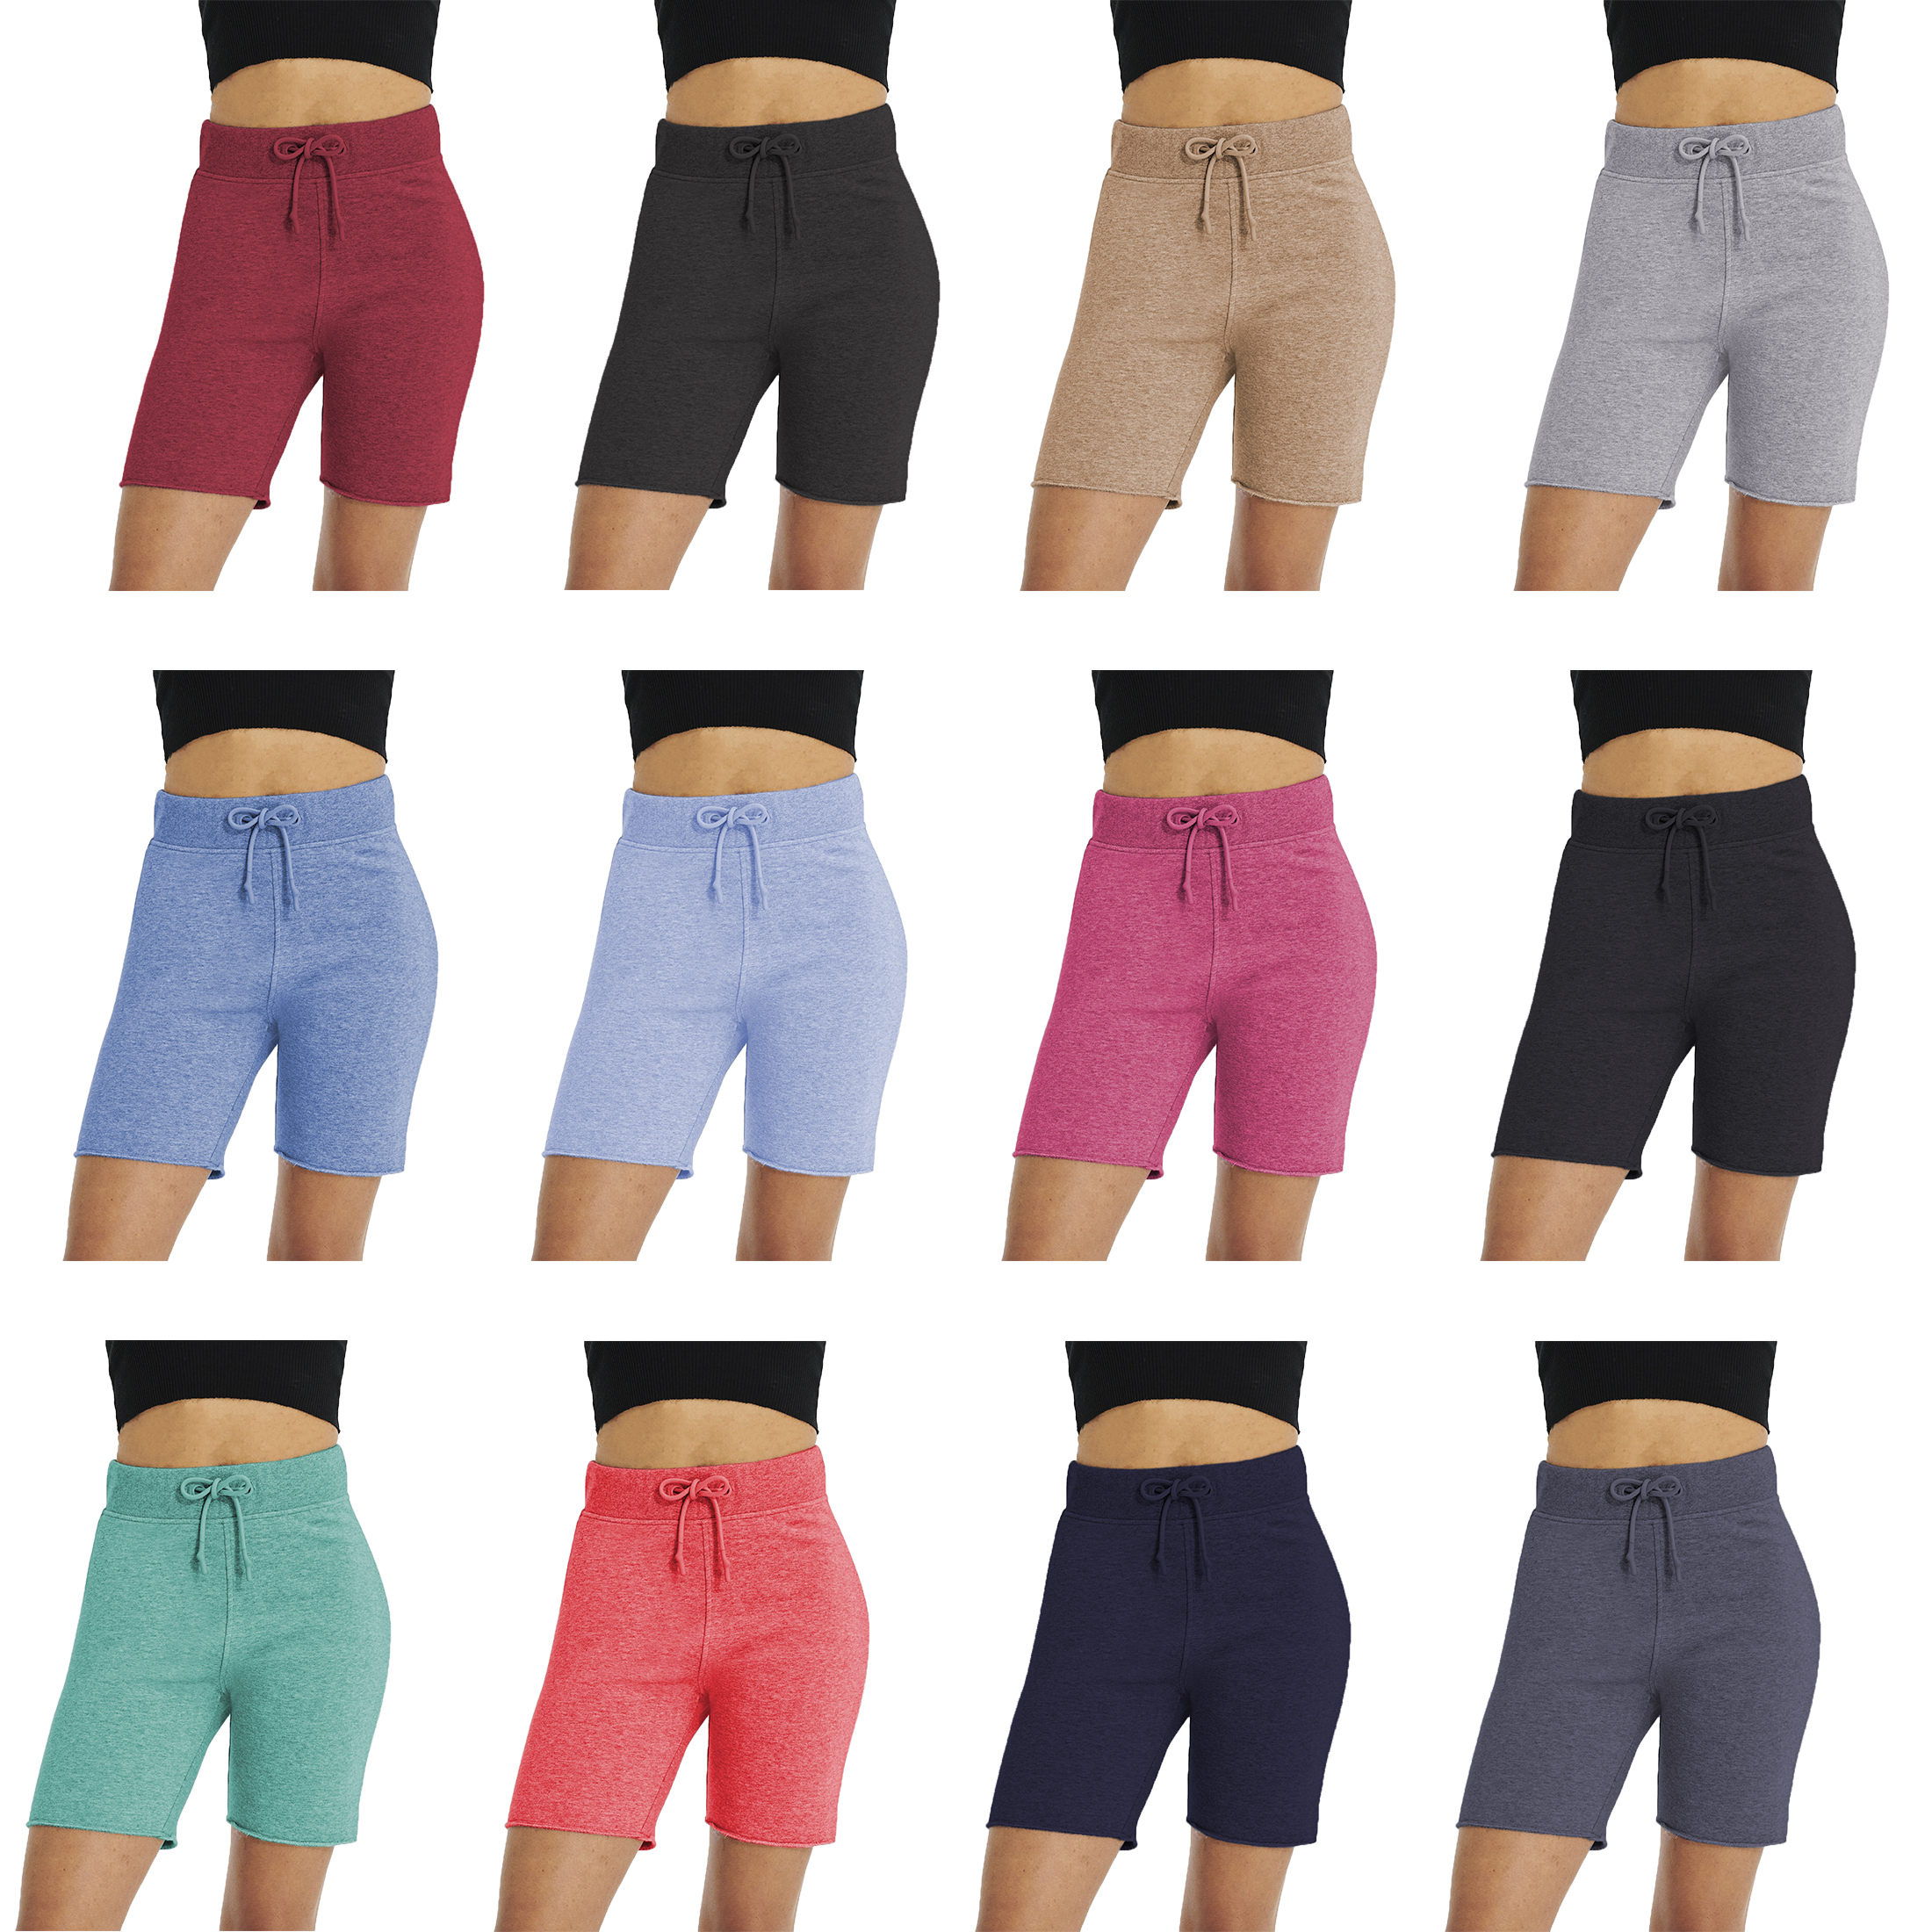 3-Pack: Ladies Soft Summer Stretch Active Athletic Lounge Sports Workout Bermuda Shorts - Medium